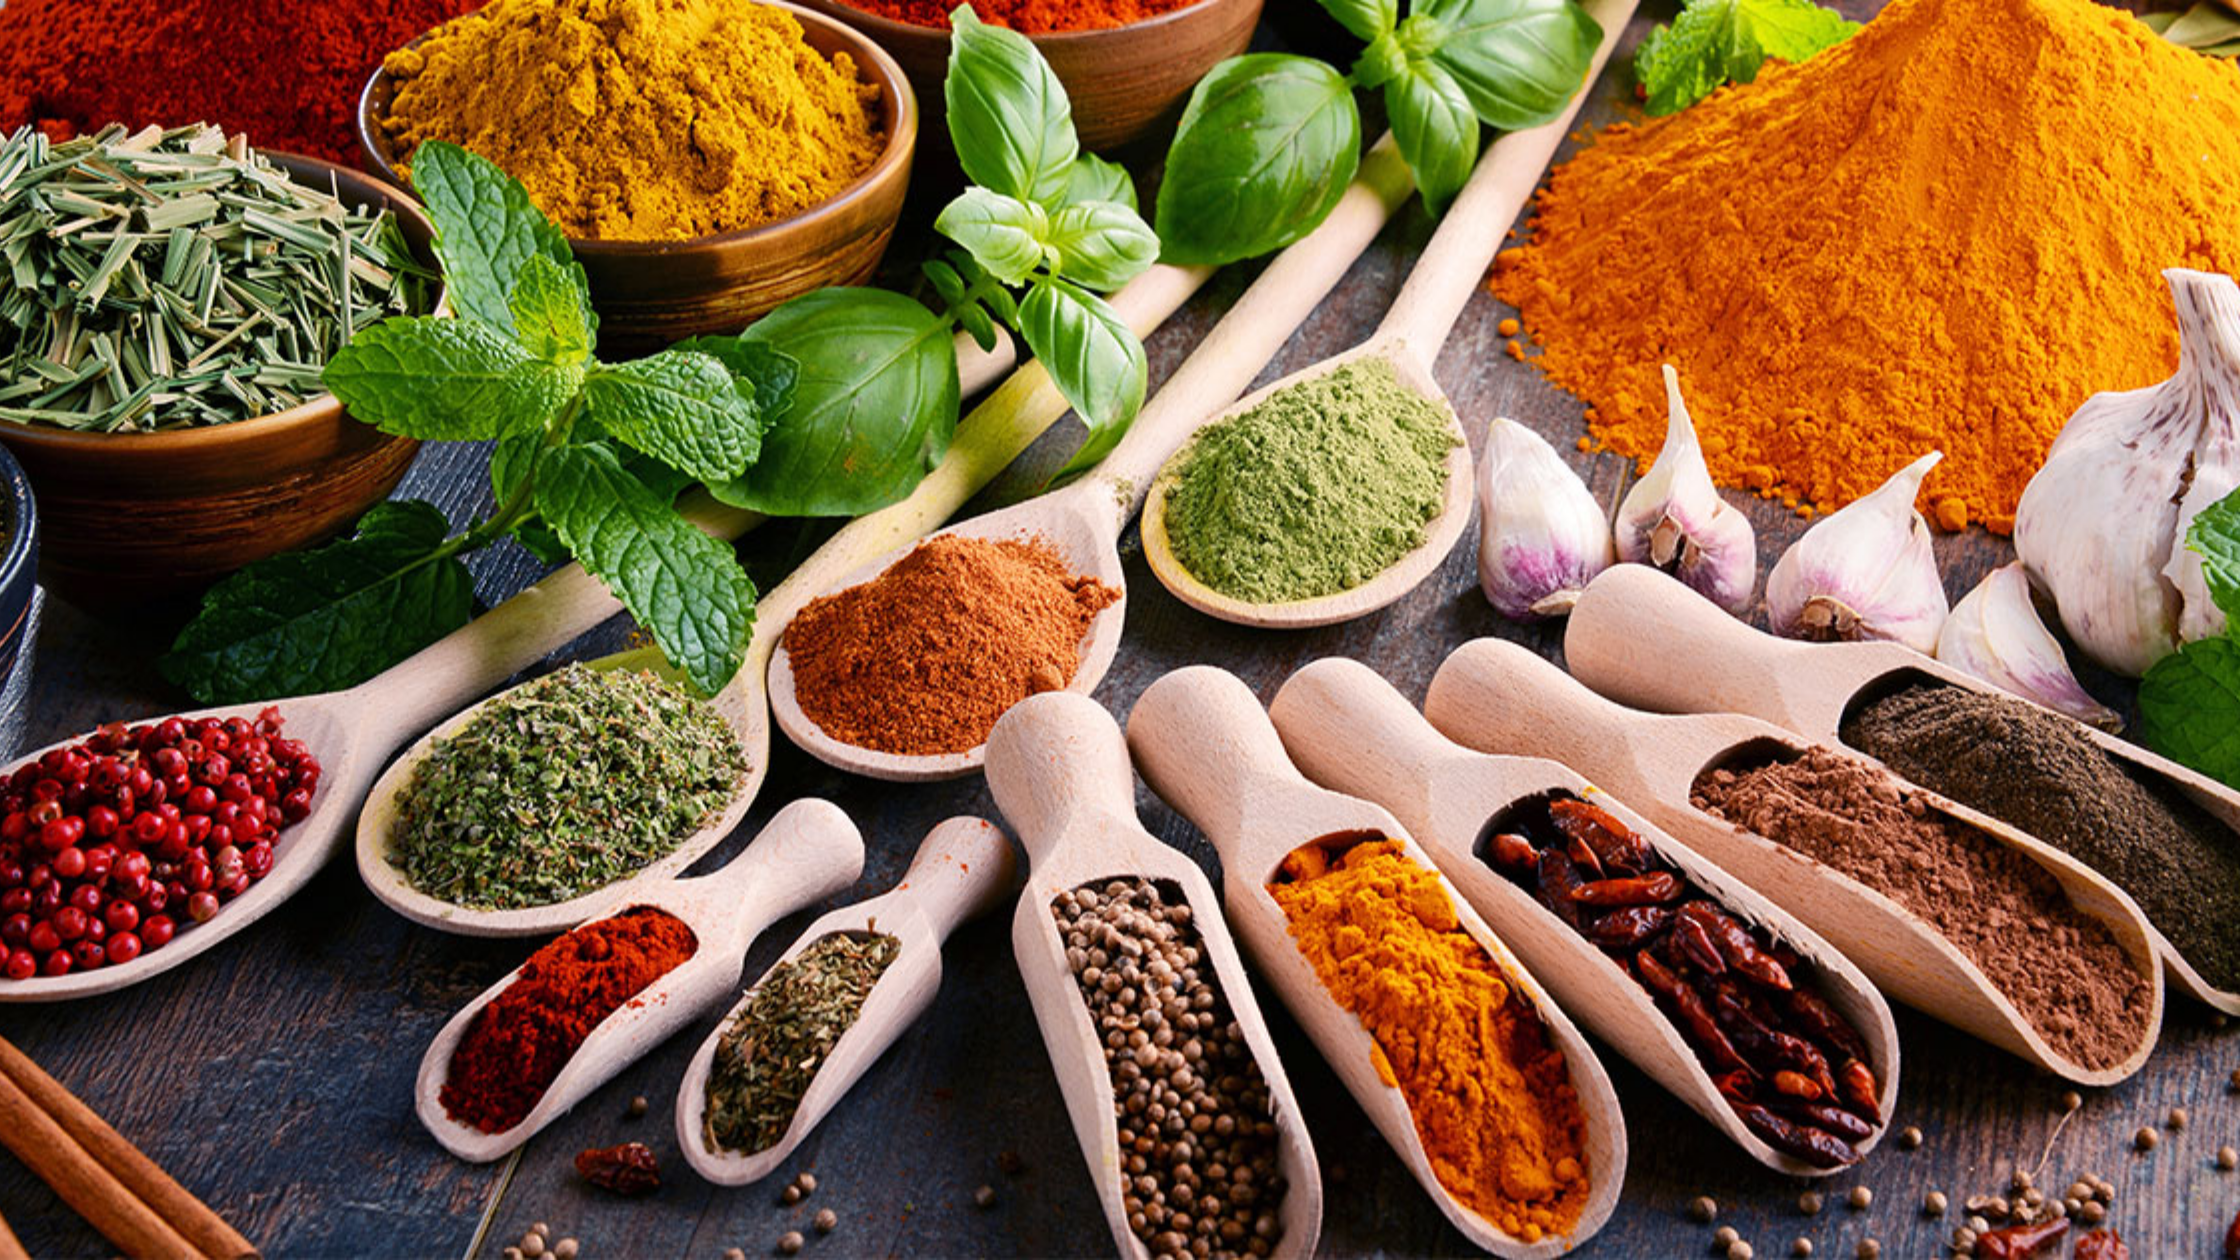 Using Herbs and Spices to Dress Up Vegetarian Dishes